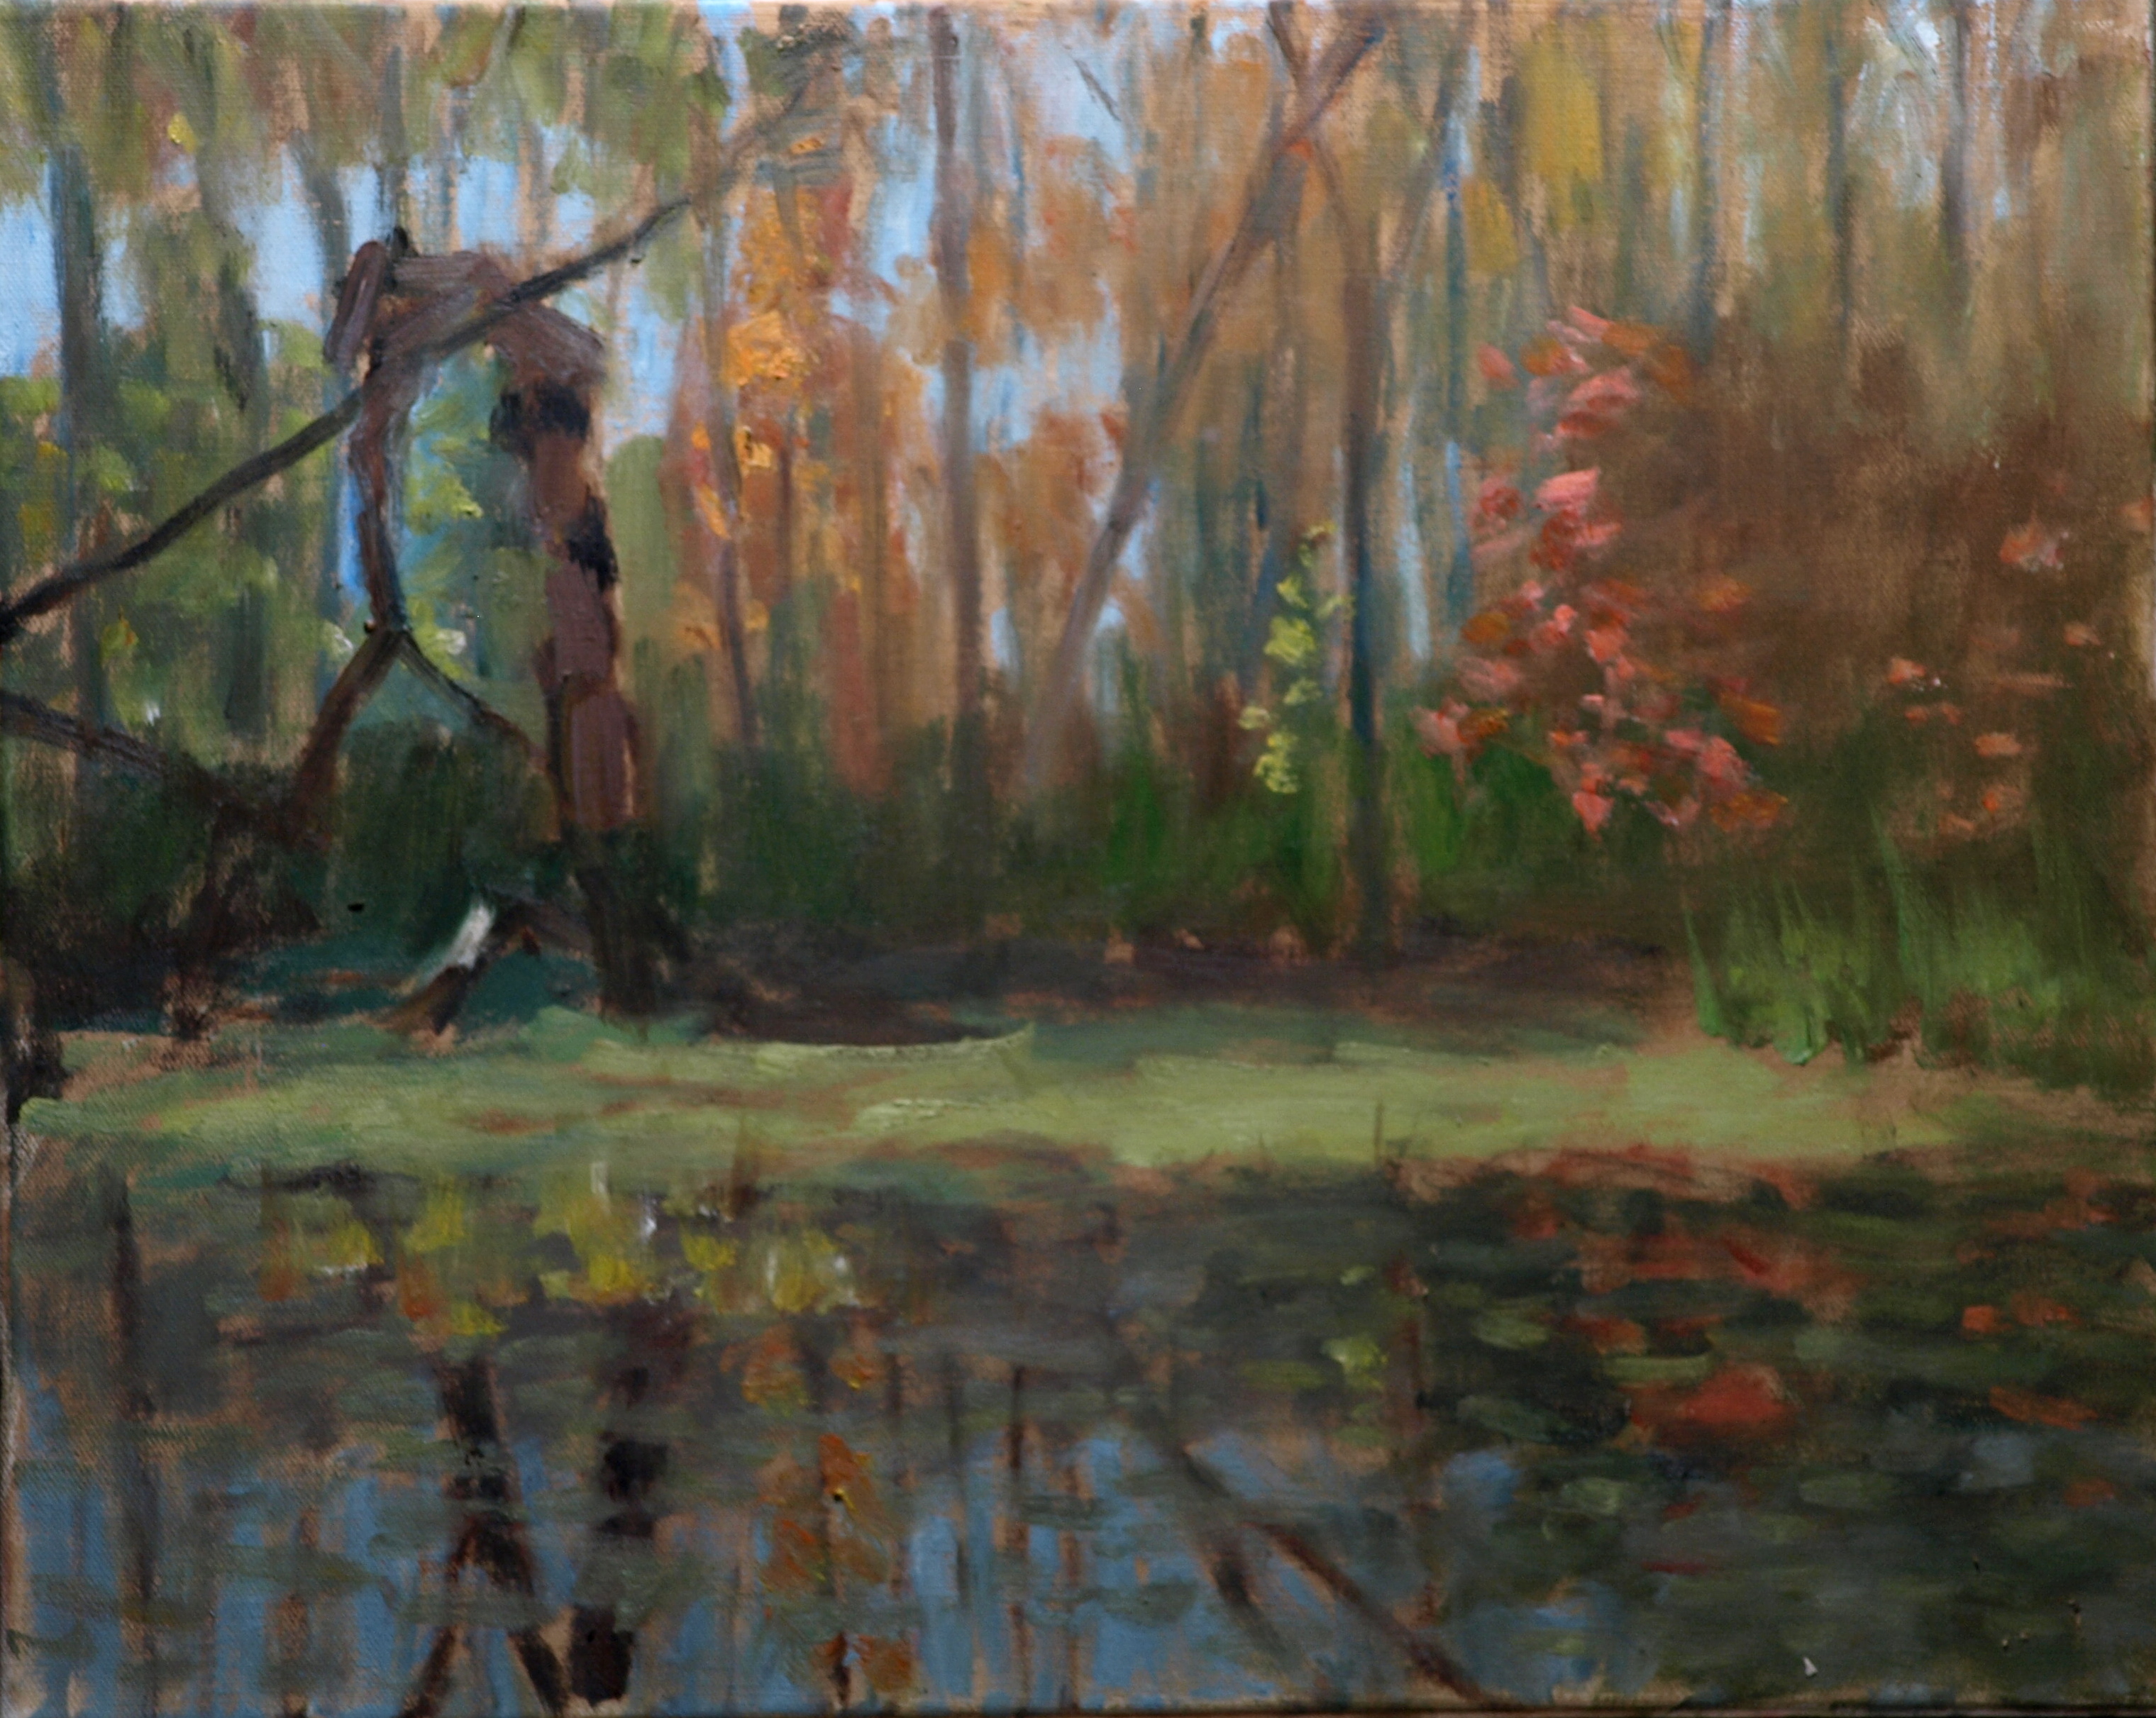 Amy's Marsh, Oil on Canvas, 16 x 20 Inches, by Richard Stalter, $450